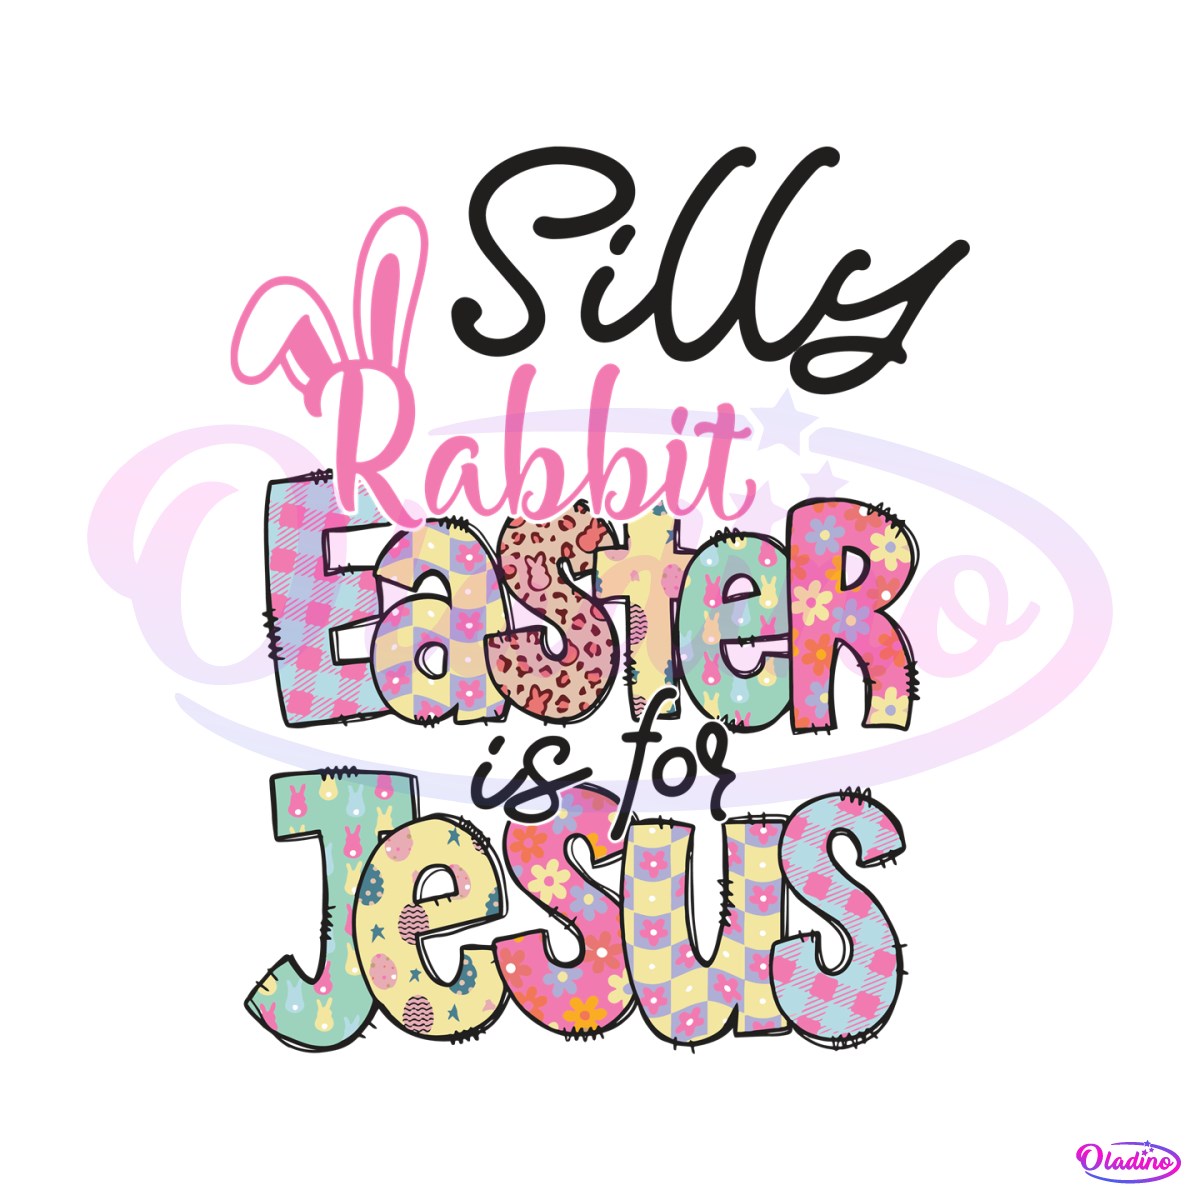 silly-rabbit-easter-is-for-jesus-svg